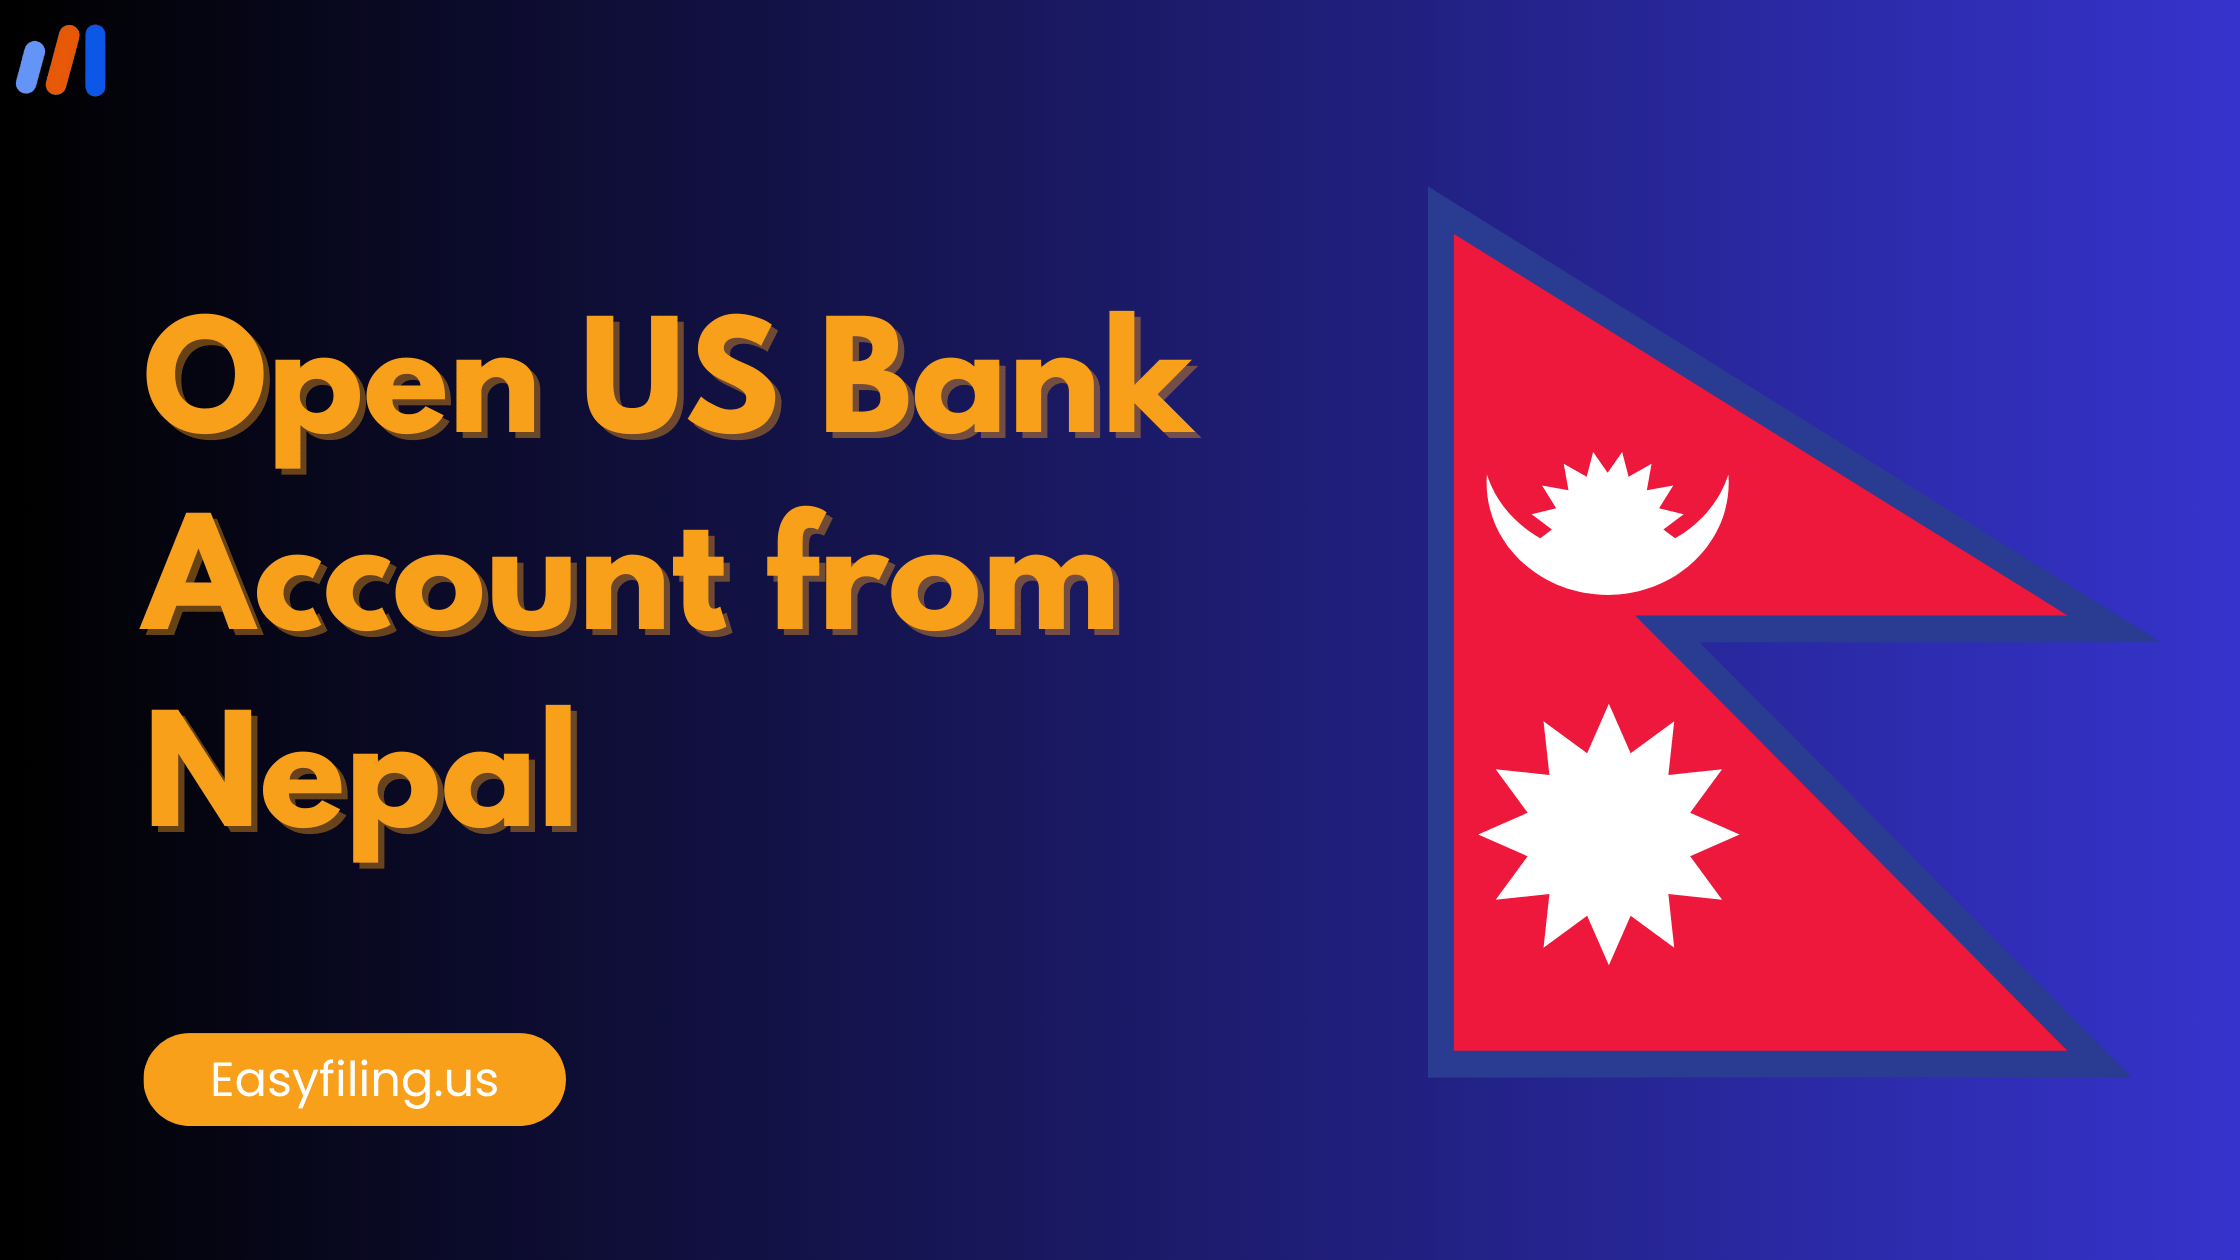 Open a US Bank Account from Nepal